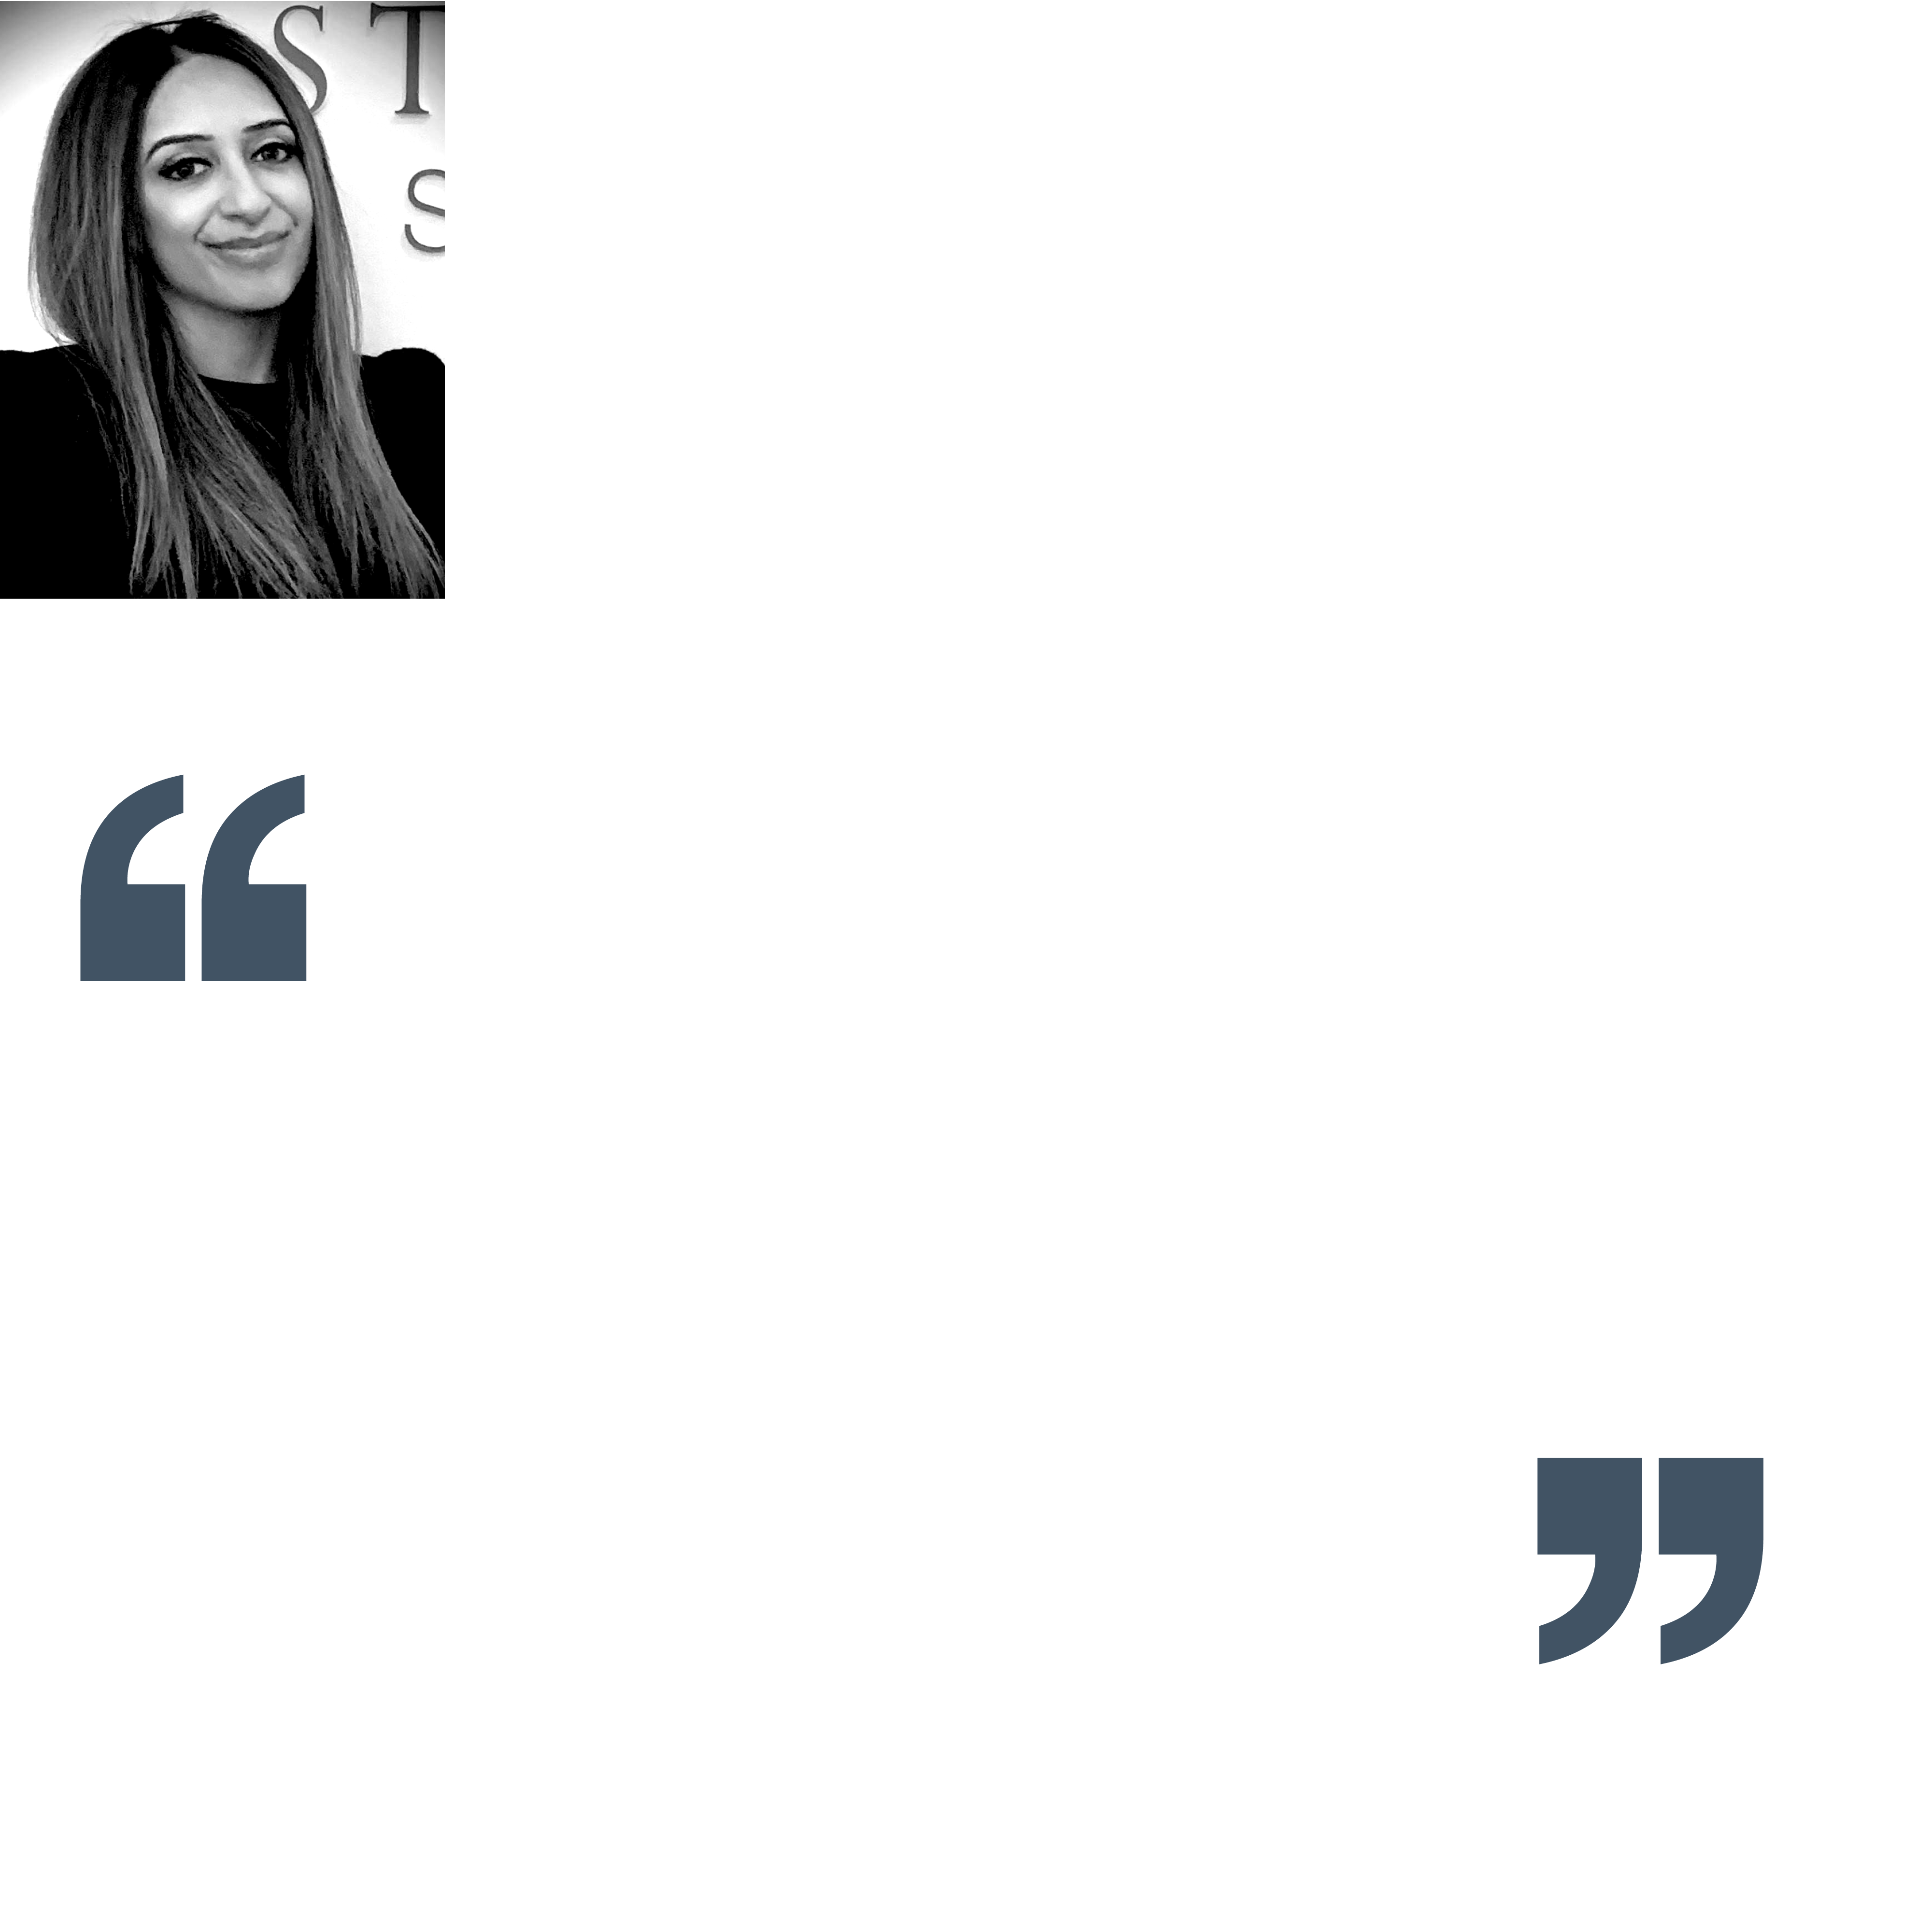 Quote from Holly Skillander, Major Injury & Casualty DWF Law LLP. "CILEX gave me the flexibility to work and study at the same time. It helped me learn what I needed to do within my role as a paralegal at the time covering subjects that I was interested in and were relevant for my career and my progression."